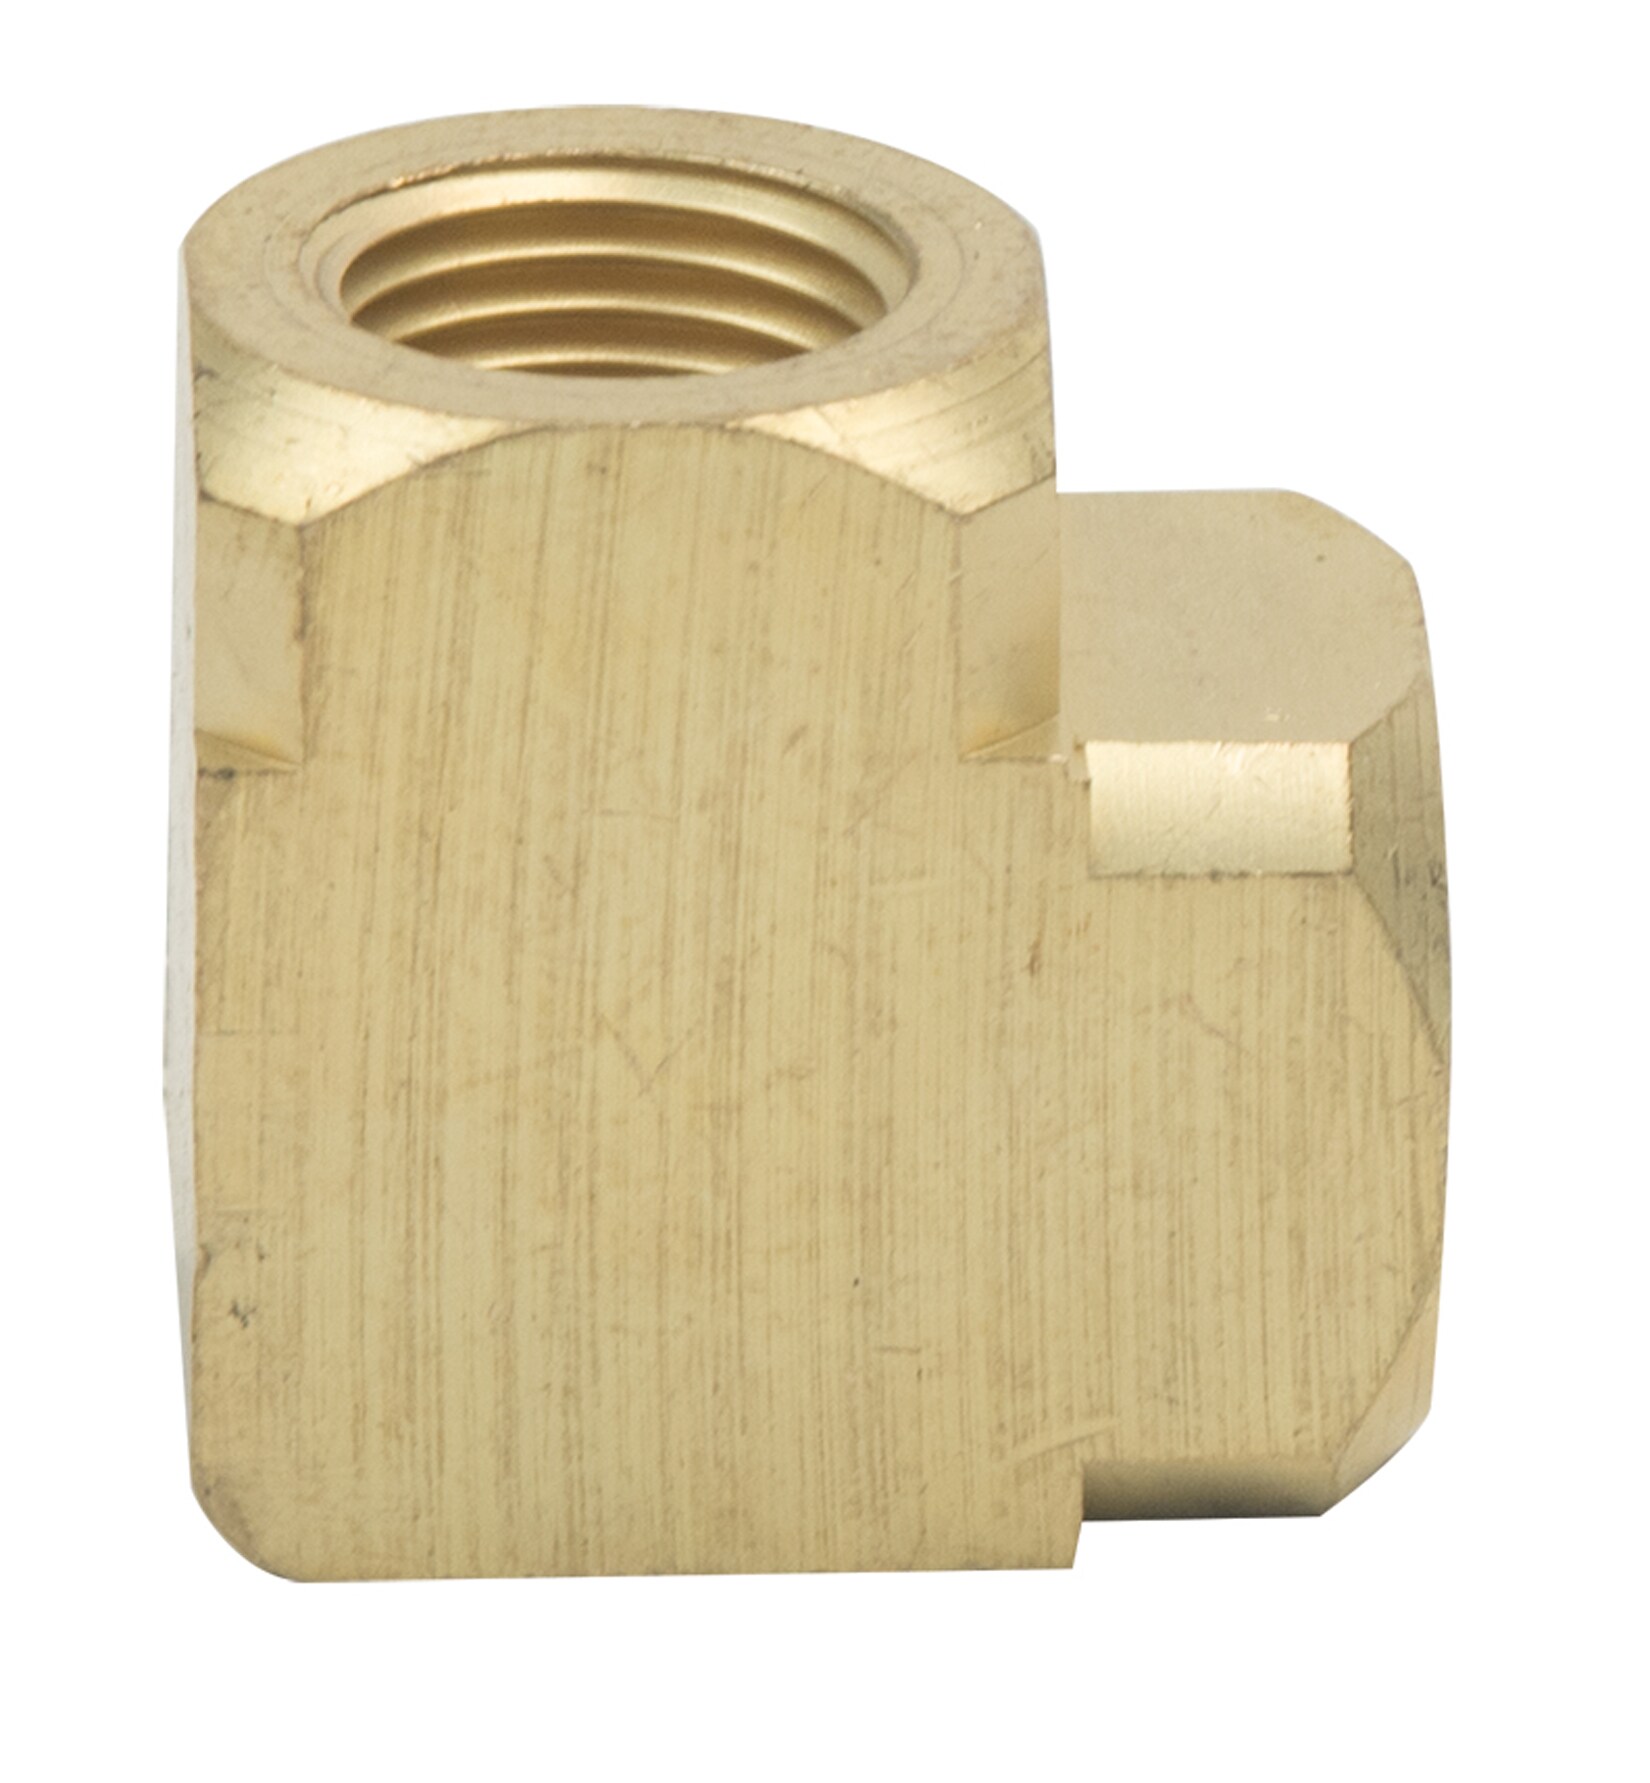 BrassCraft 1/8-in x 1/8-in Threaded Female Elbow Fitting at